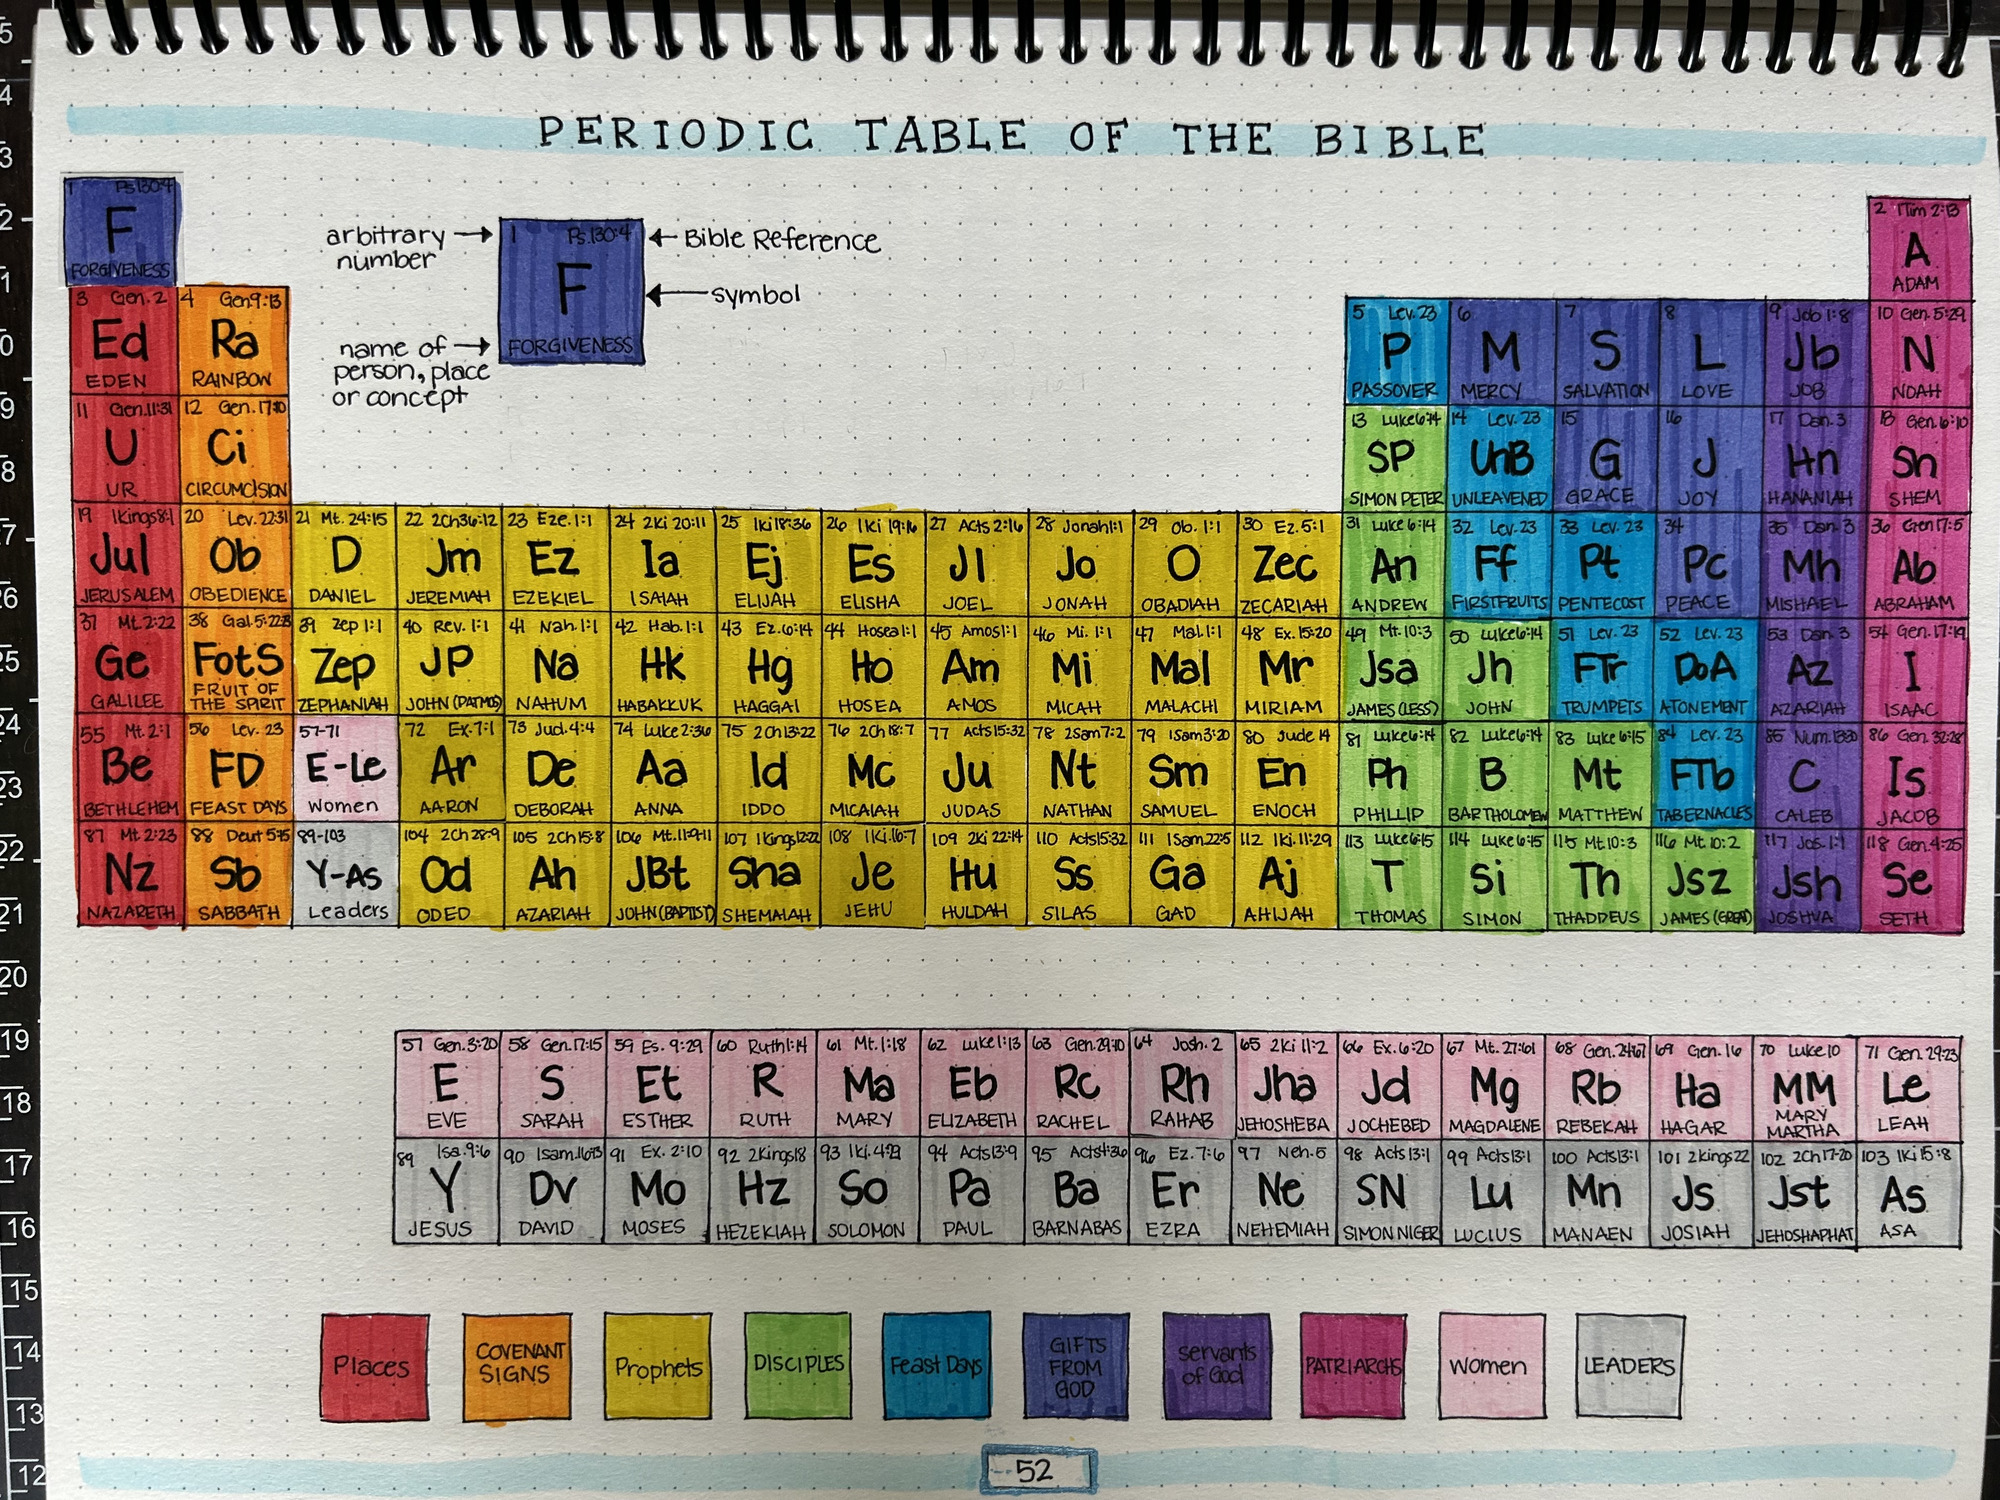 Periodic Table of the Bible